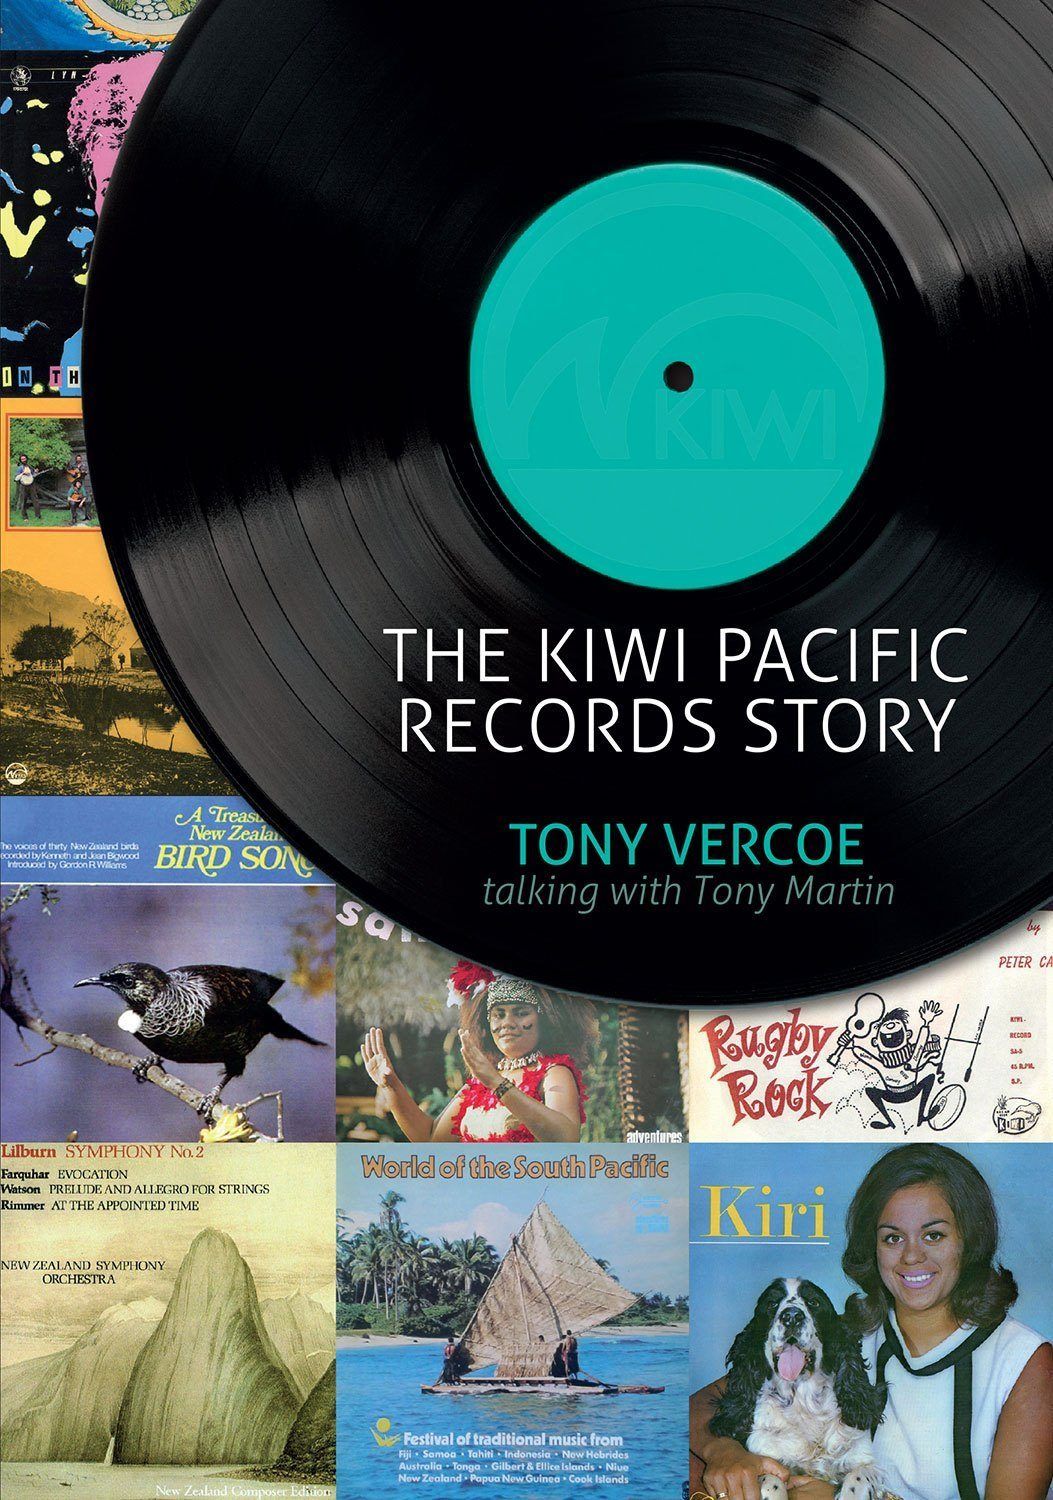 The Kiwi Pacific Records Story